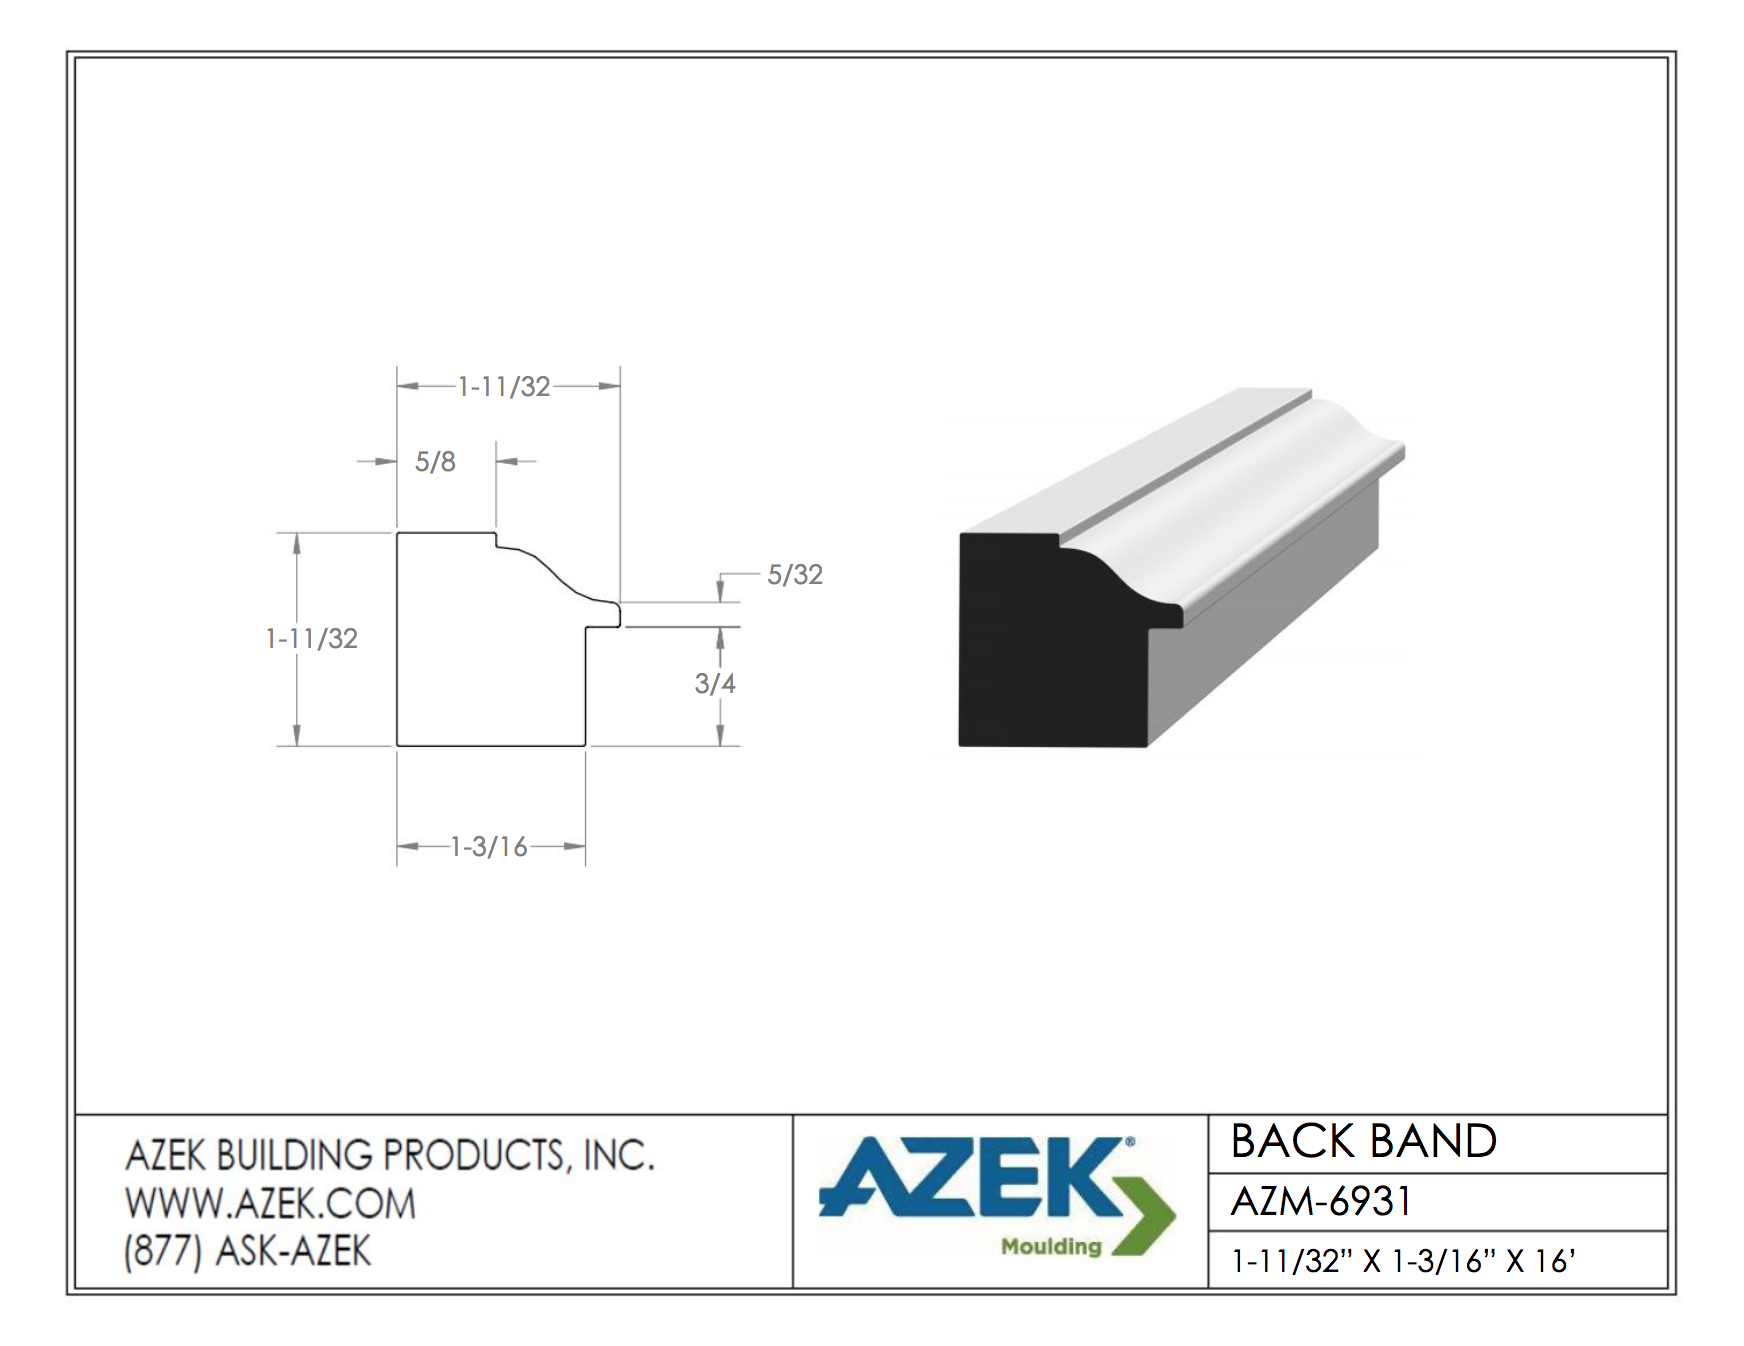 Azek Moulding Back Band AZM 6931 Specifications - TimberTown